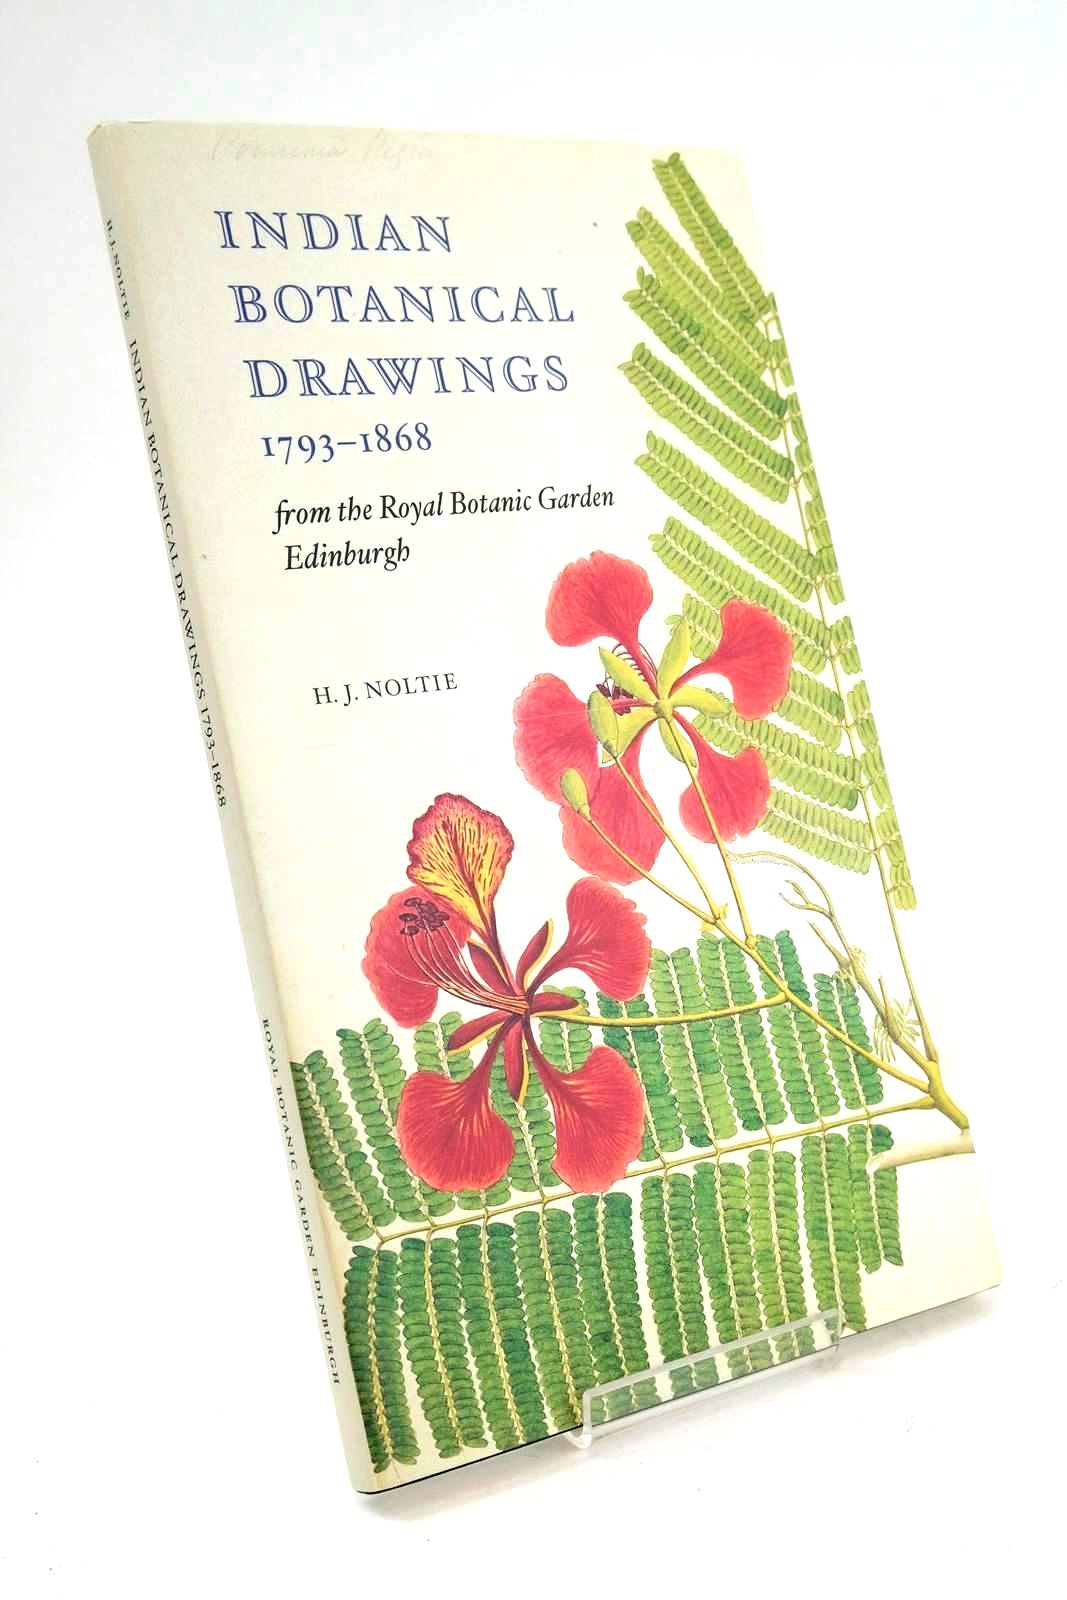 Photo of INDIAN BOTANICAL DRAWINGS 1793-1868 written by Noltie, Henry J. published by Royal Botanic Garden Edinburgh (STOCK CODE: 1324274)  for sale by Stella & Rose's Books